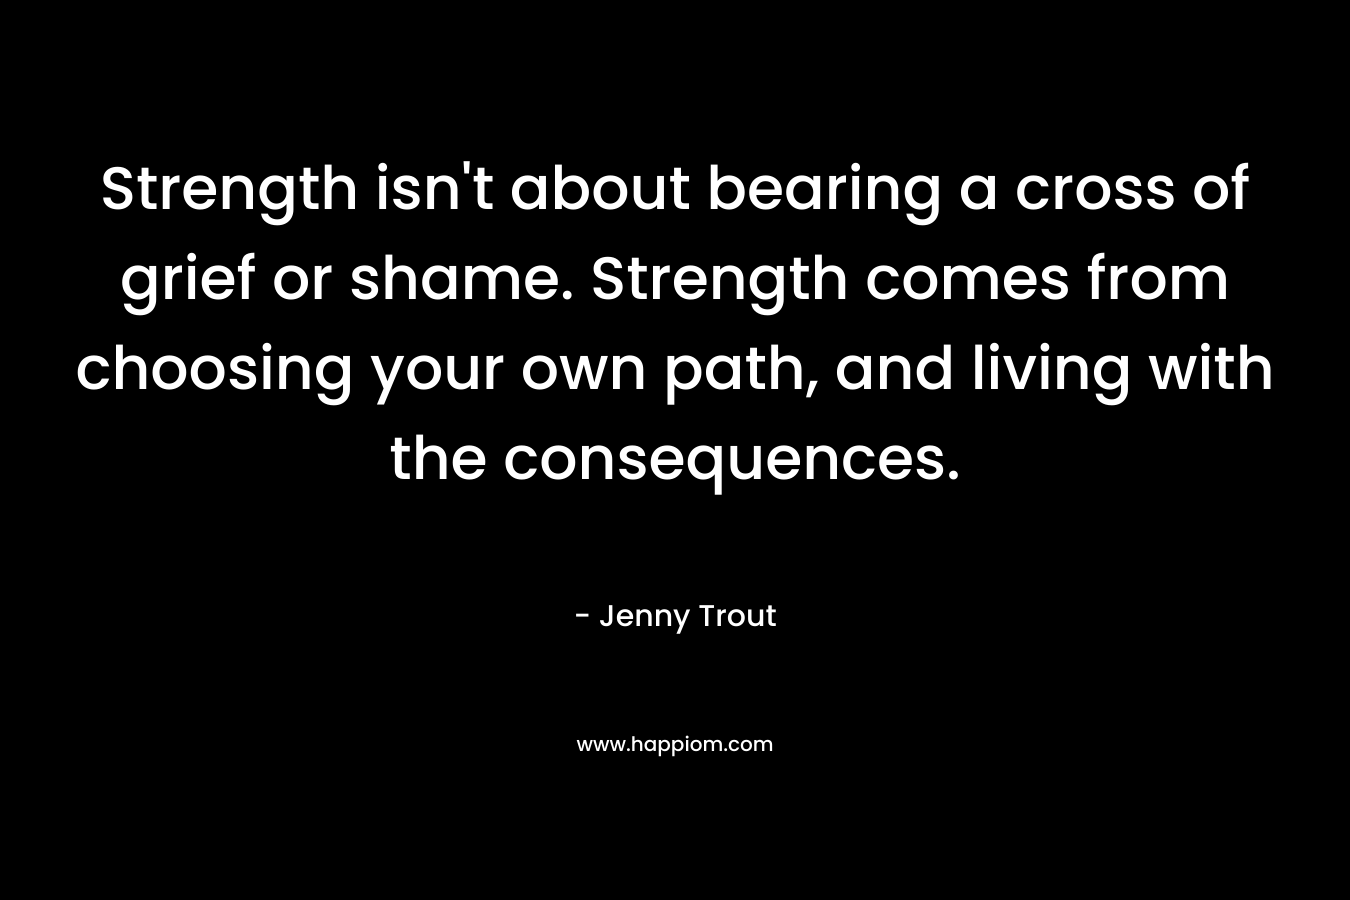 Strength isn't about bearing a cross of grief or shame. Strength comes from choosing your own path, and living with the consequences.